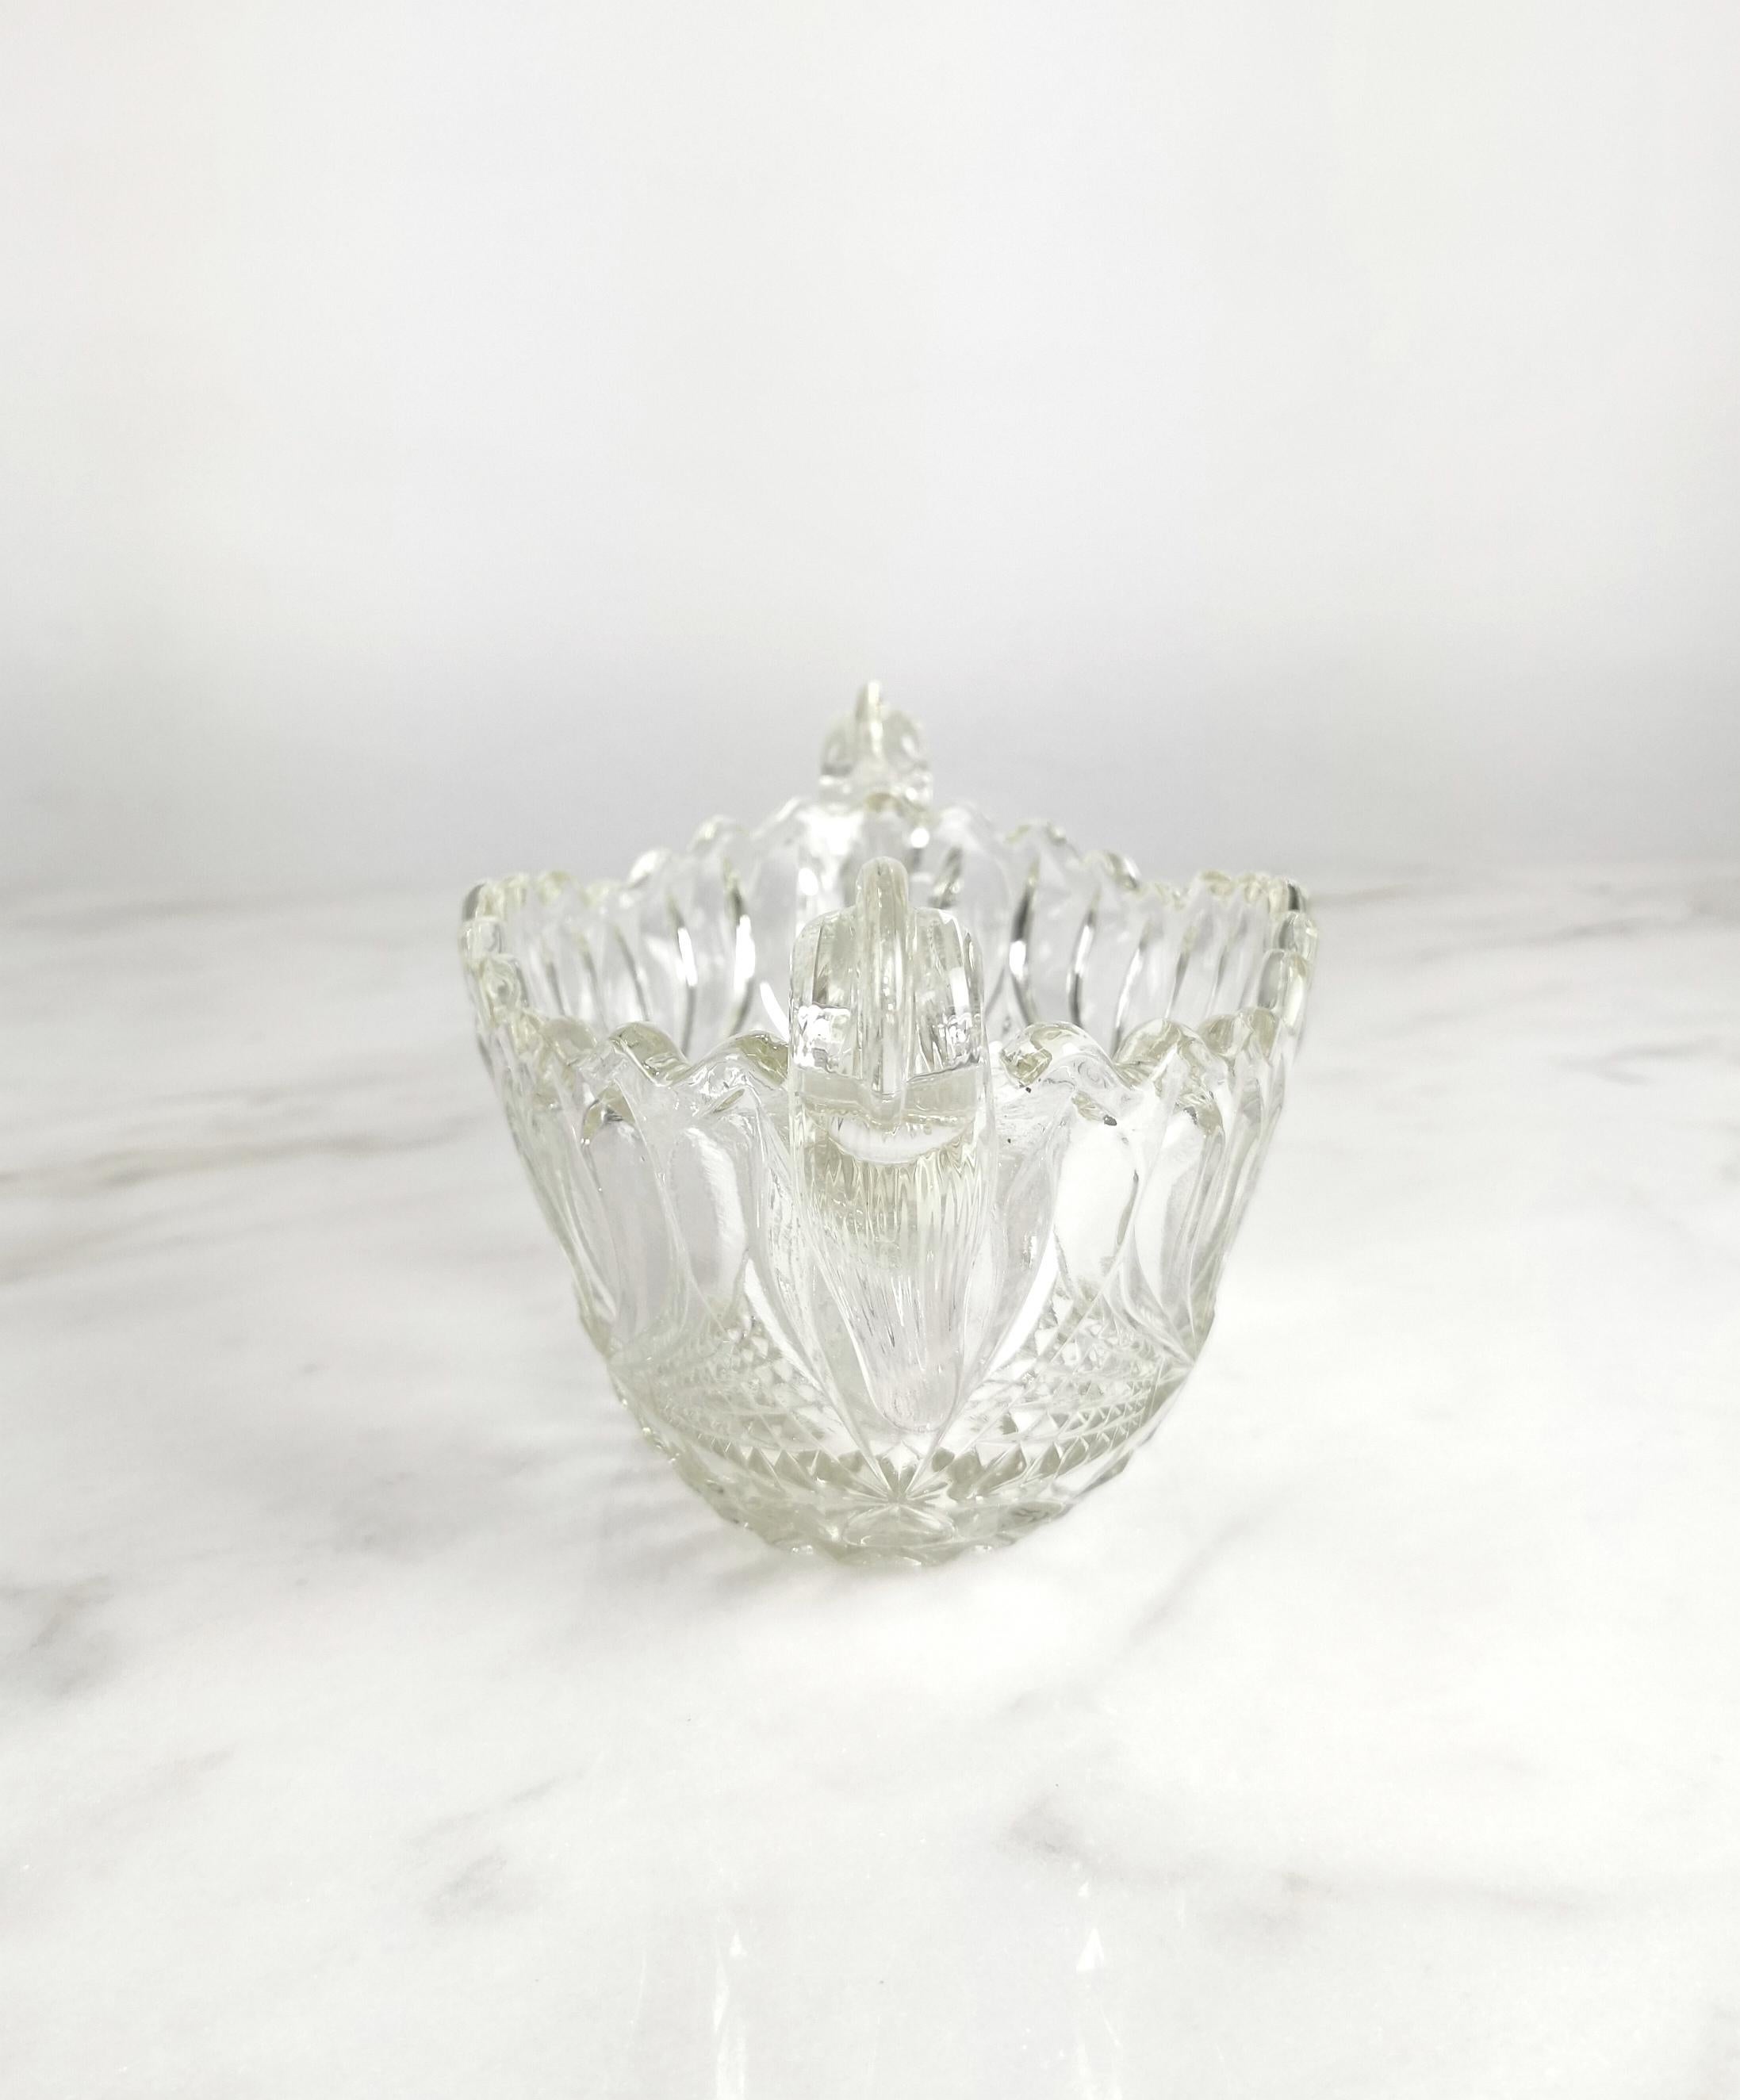 20th Century Centerpiece Carved Crystal Glass Transparent Mid-Century Italian Design, 1950s For Sale